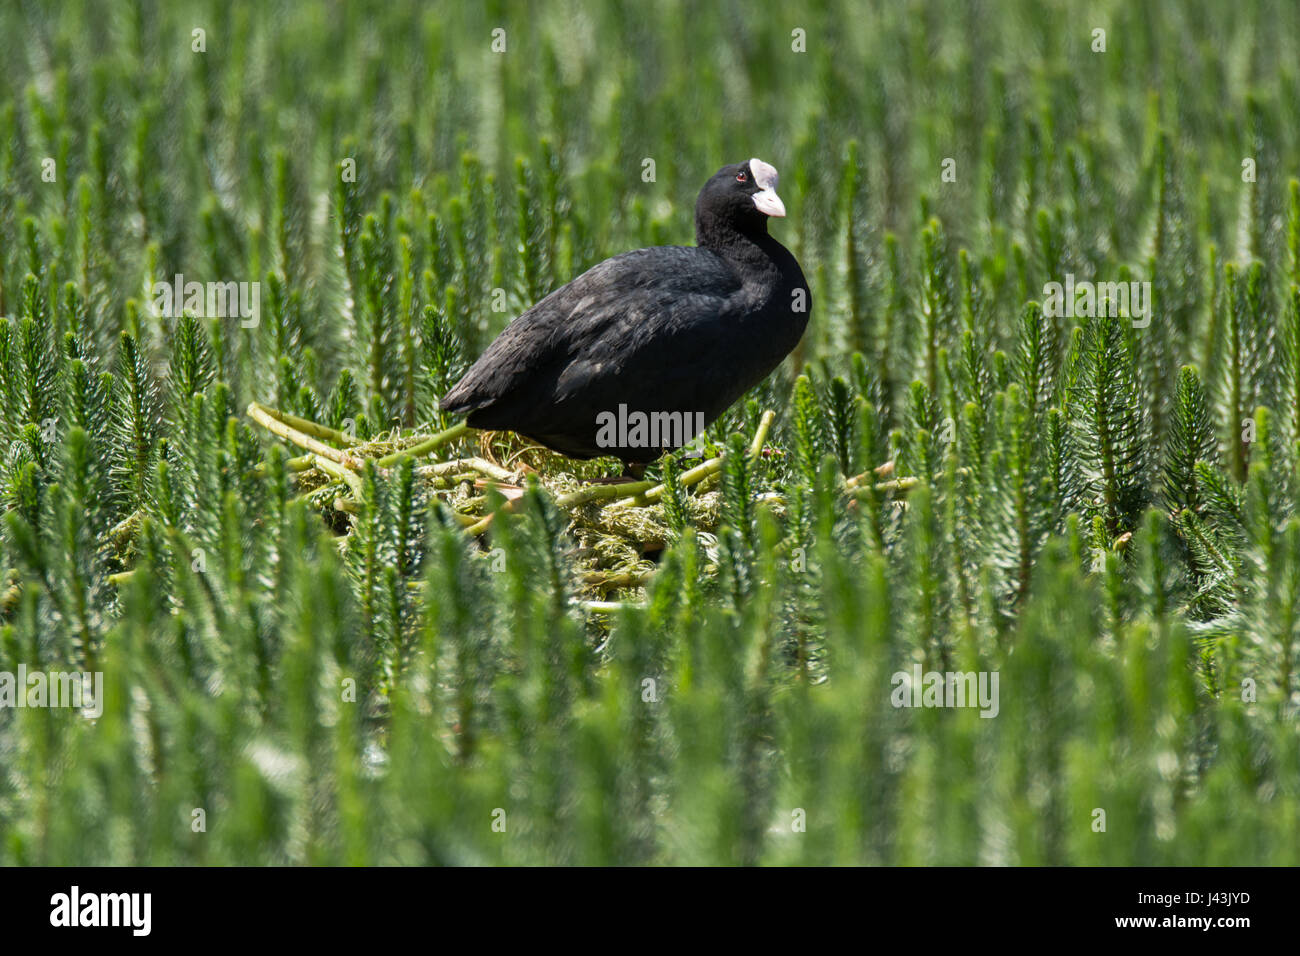 Coot (Fulica atra) standing on nest amongst aquatic vegetation. Black water bird in the family Rallidae on nest constructed of plant material Stock Photo